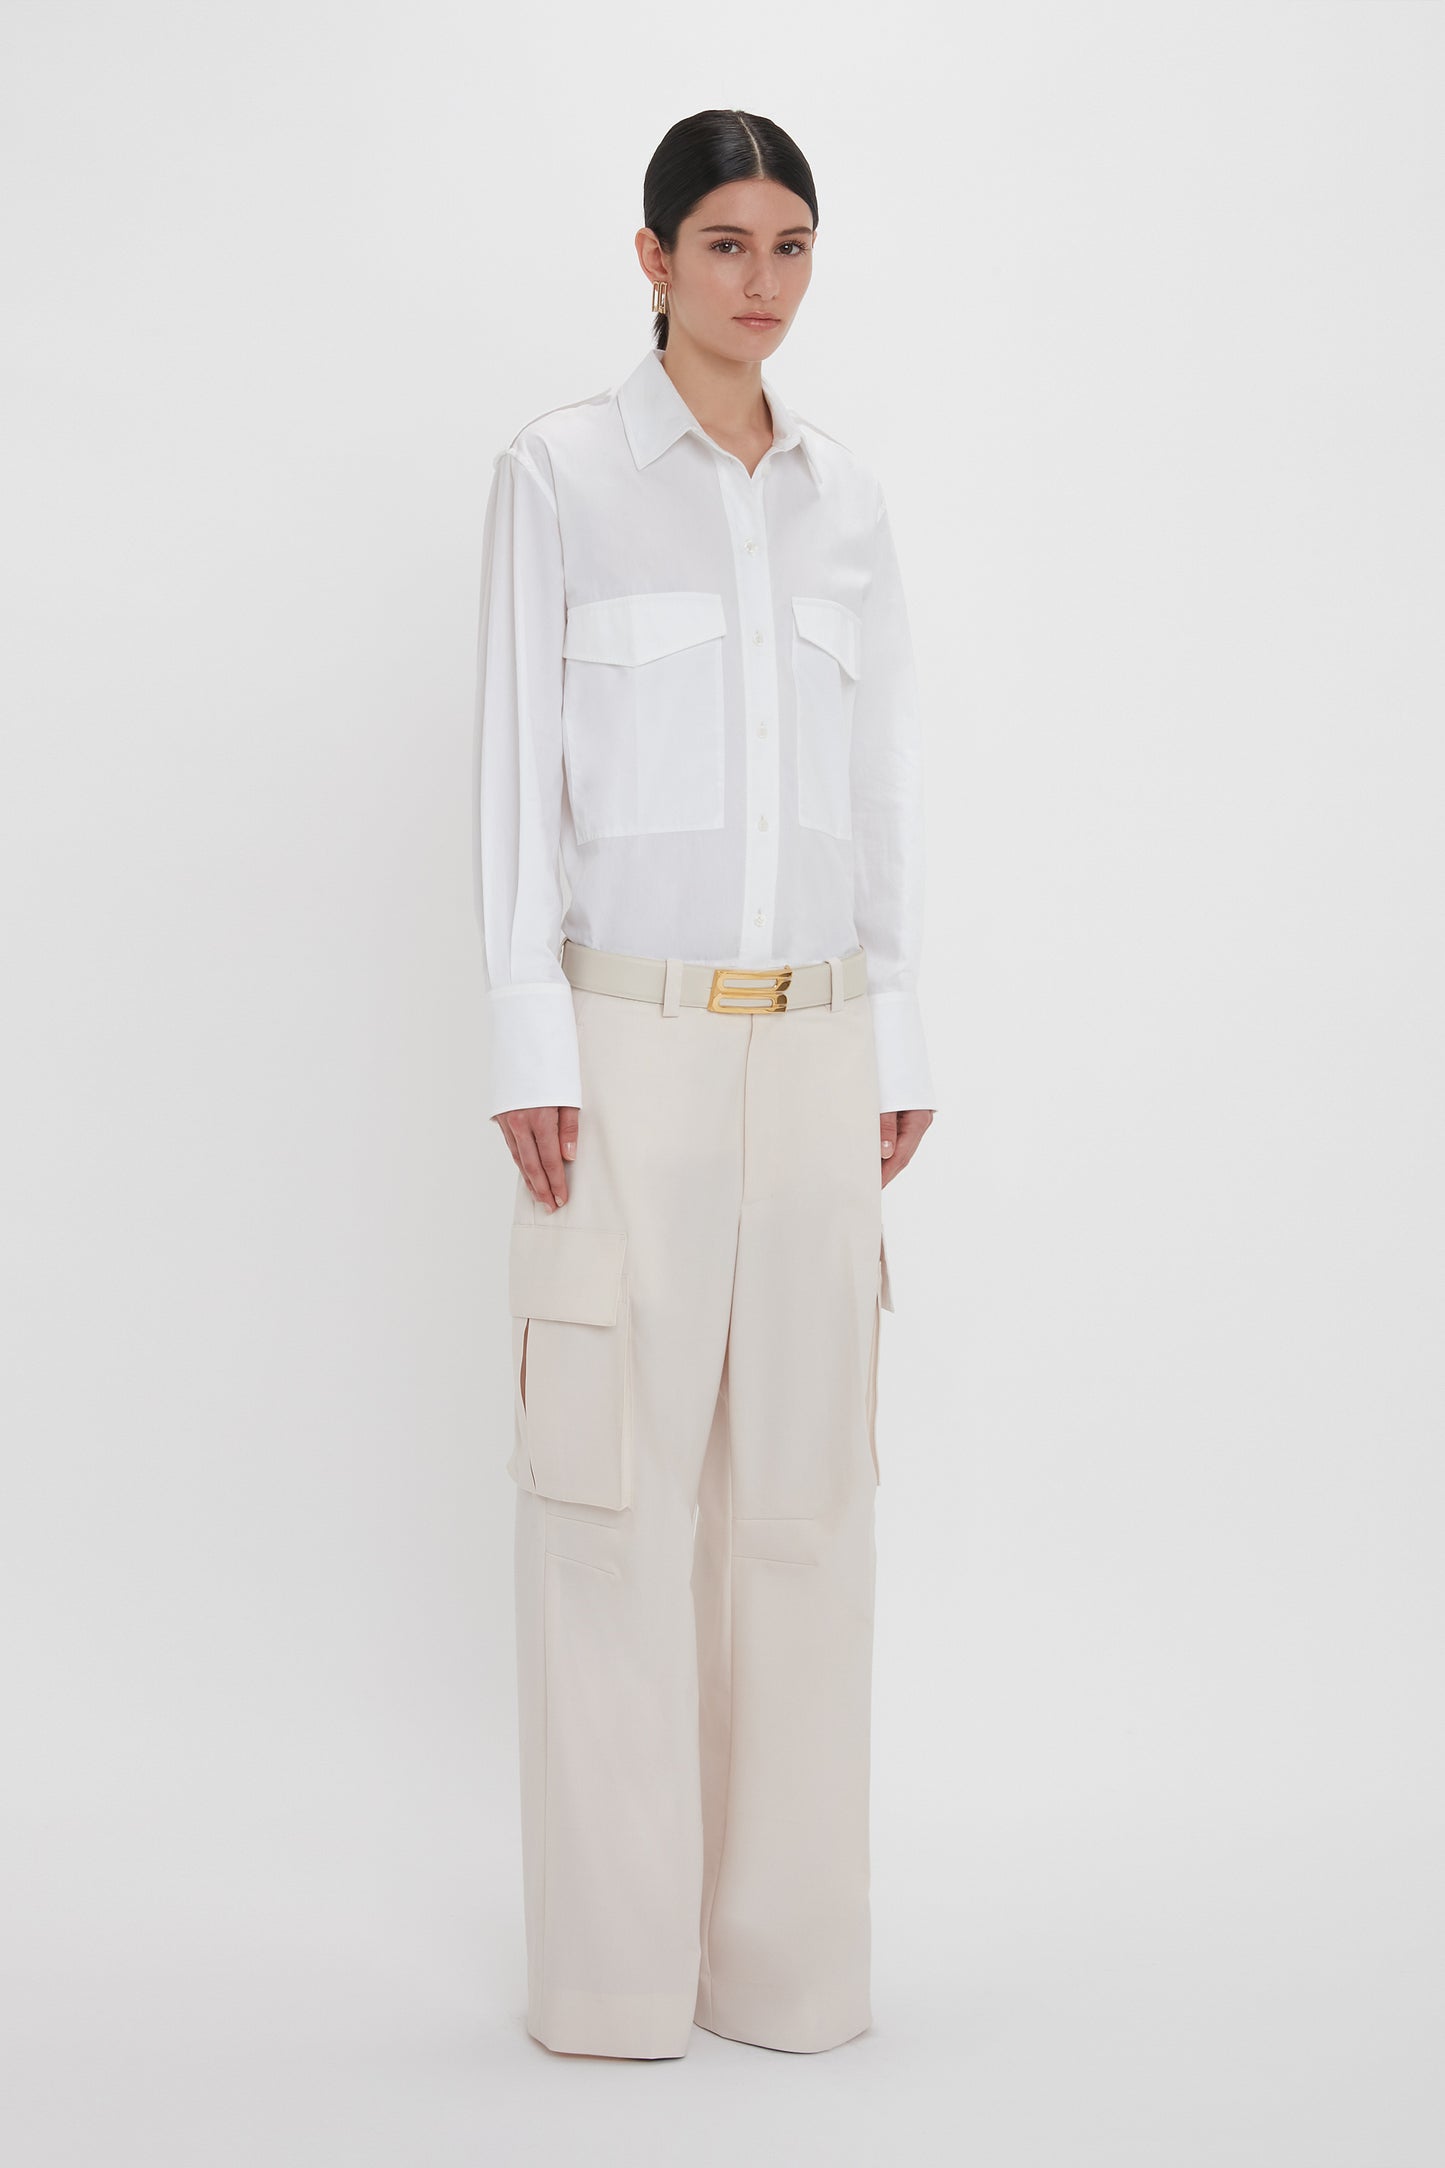 A person with dark hair wearing an Oversized Pocket Shirt in White by Victoria Beckham and beige high-waisted wide-leg cargo pants stands against a plain white background.